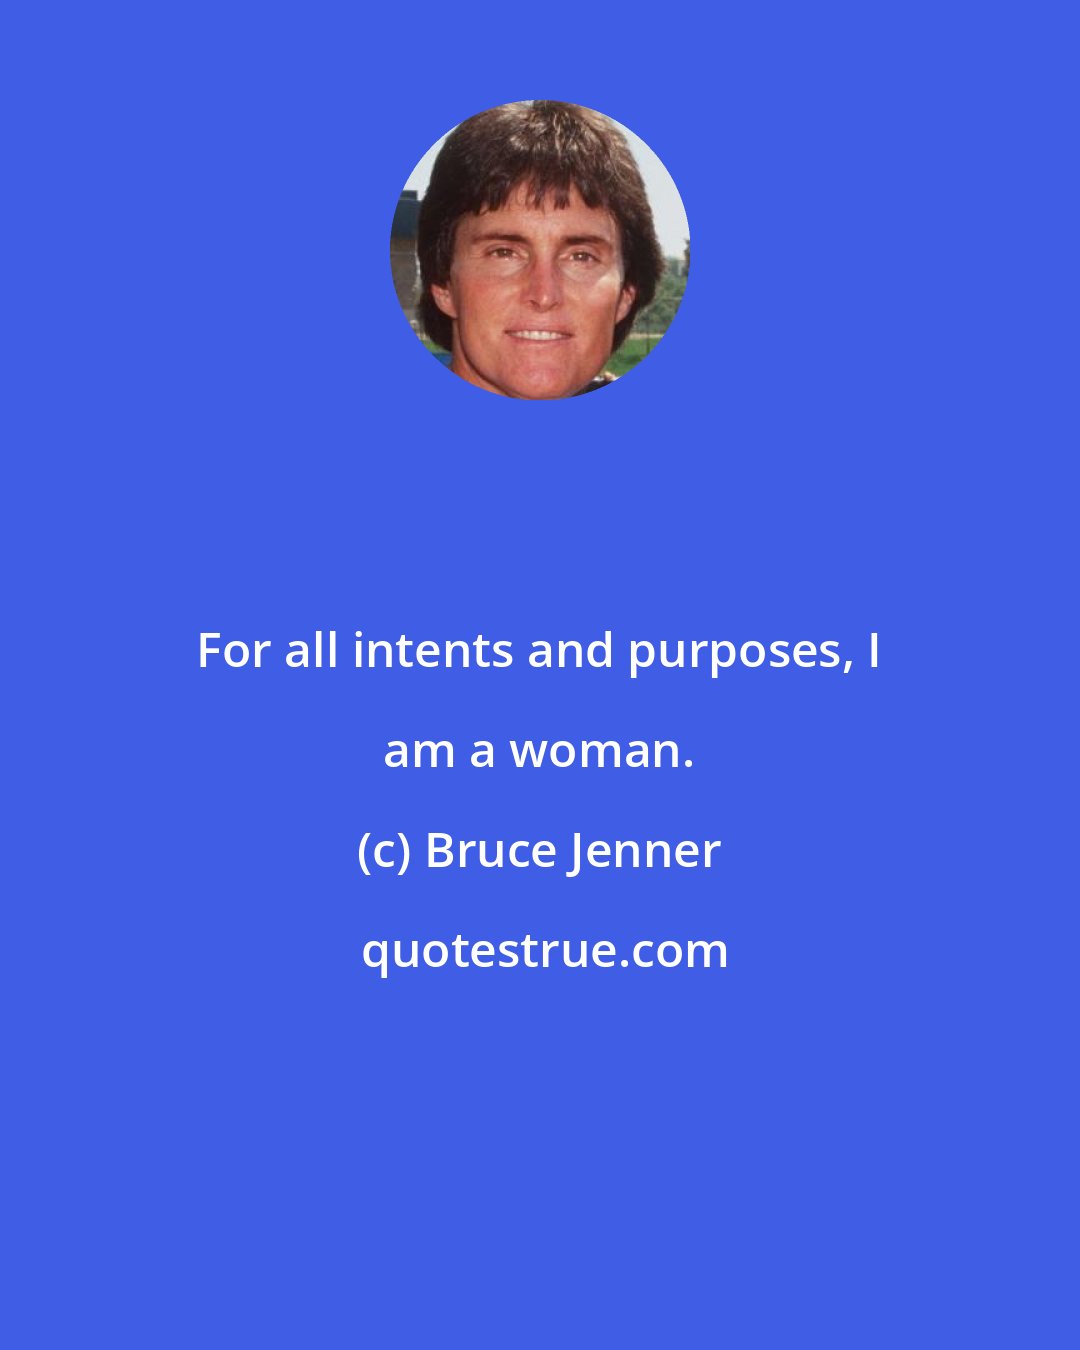 Bruce Jenner: For all intents and purposes, I am a woman.